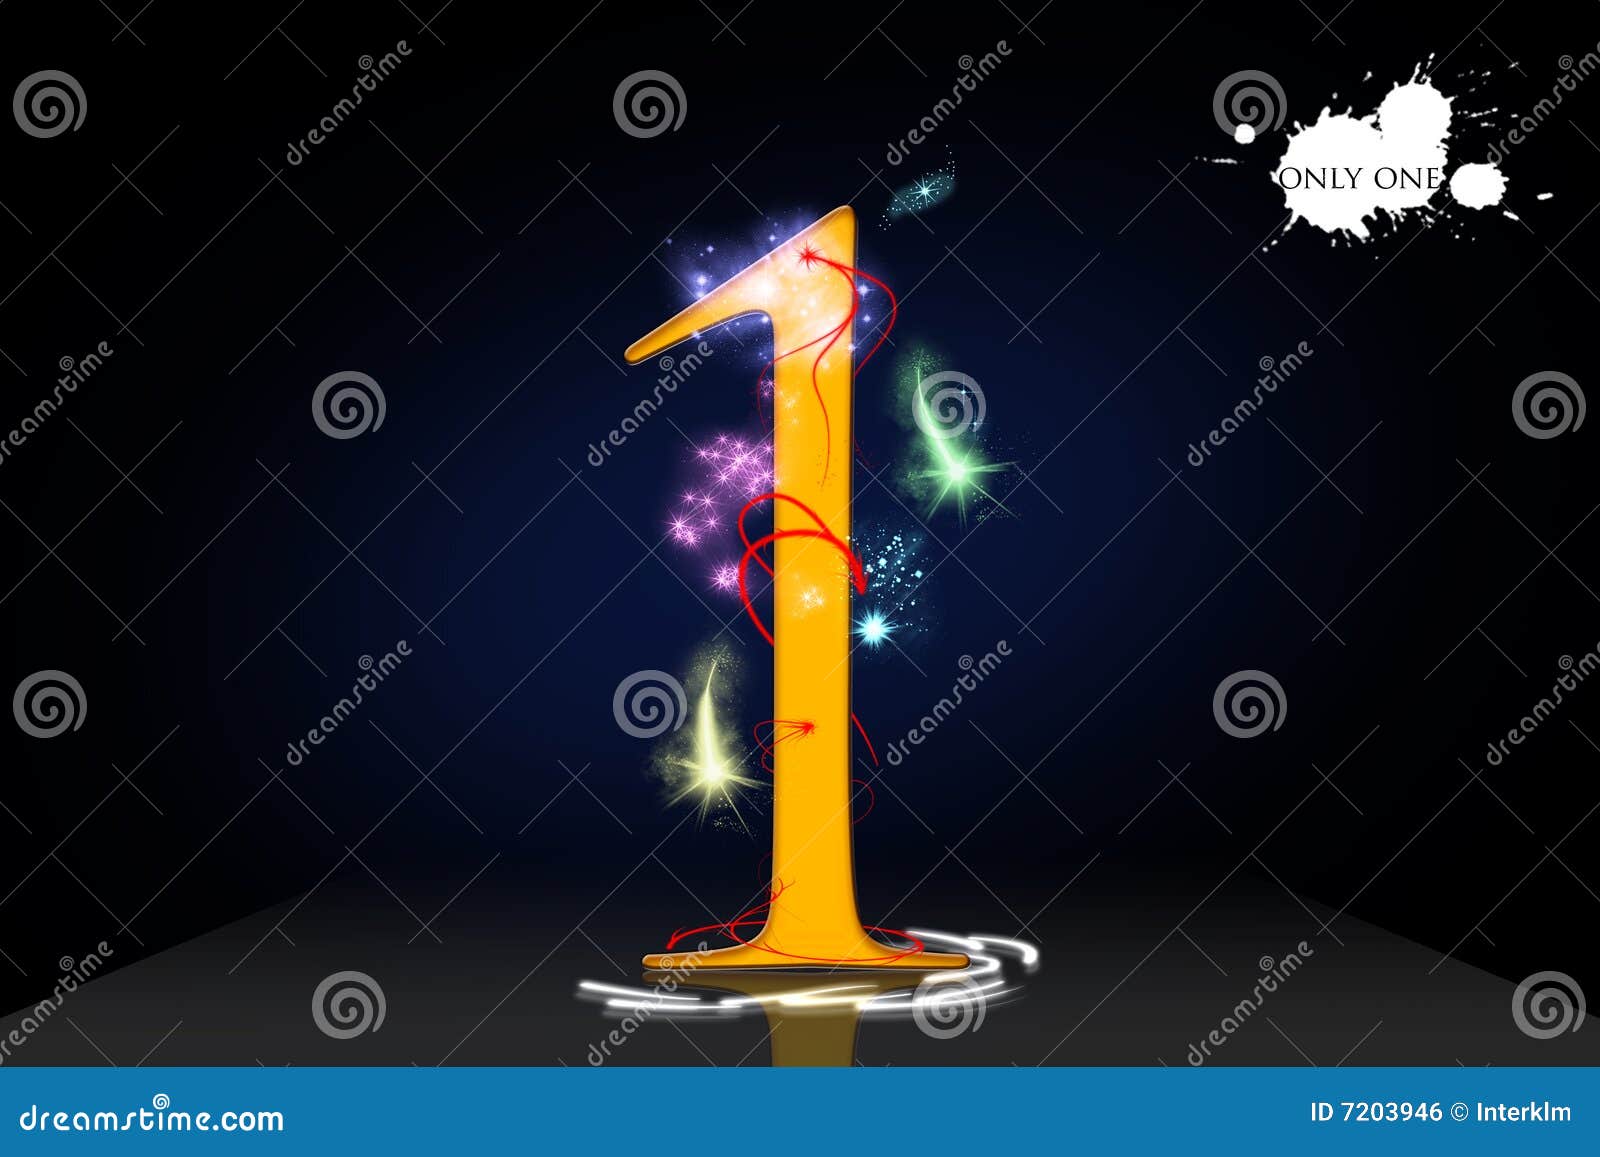 First_one stock illustration. Illustration of high, exclusive - 7203946